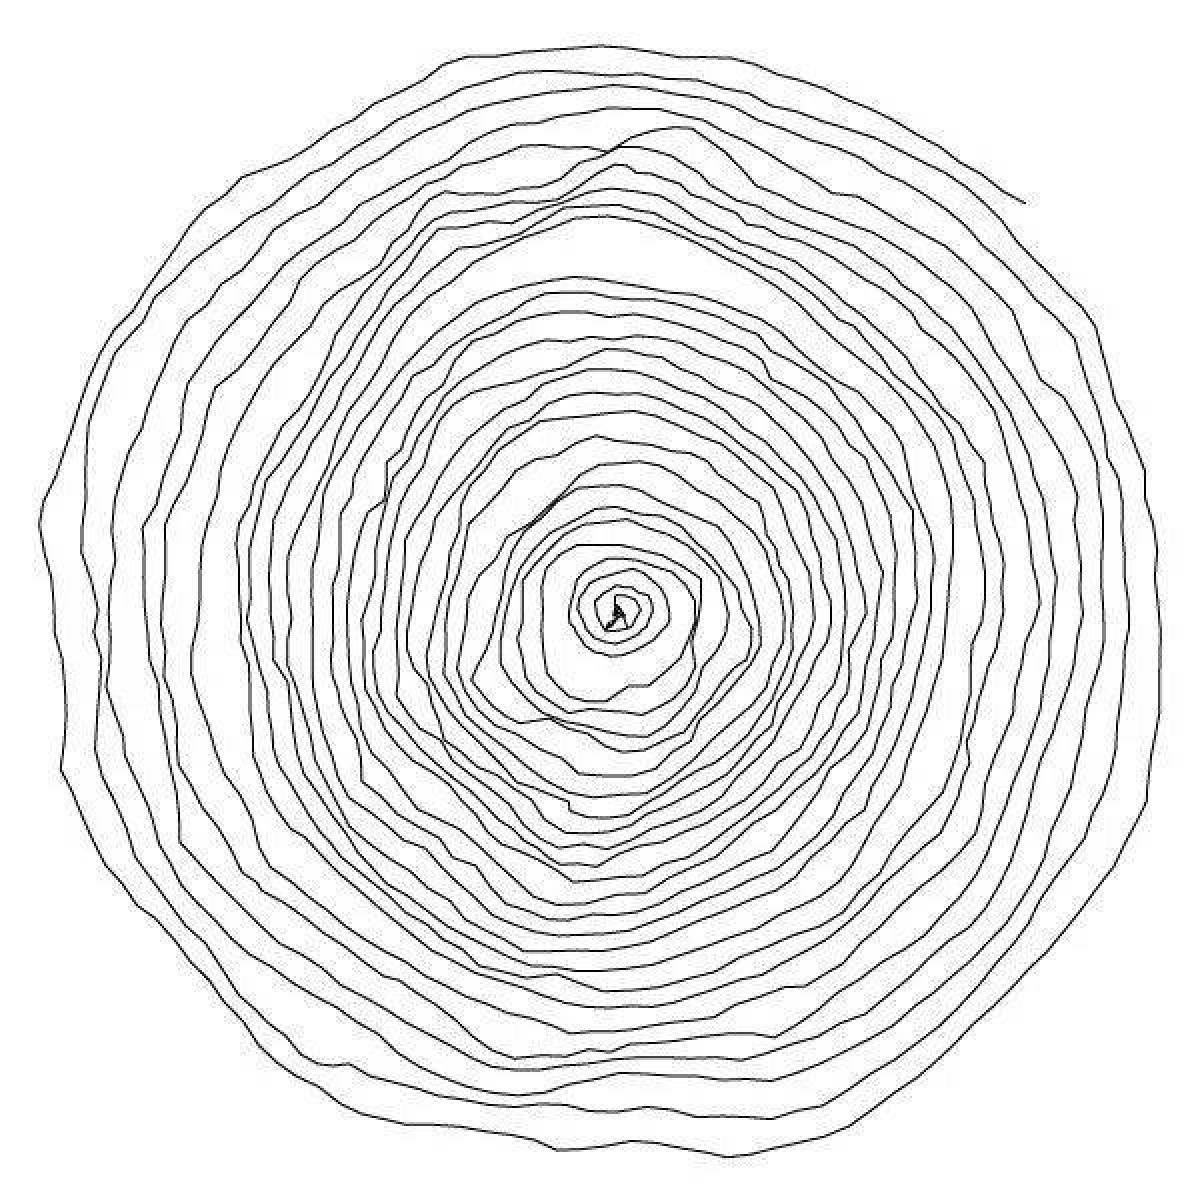 Coloring page with awesome circle pattern